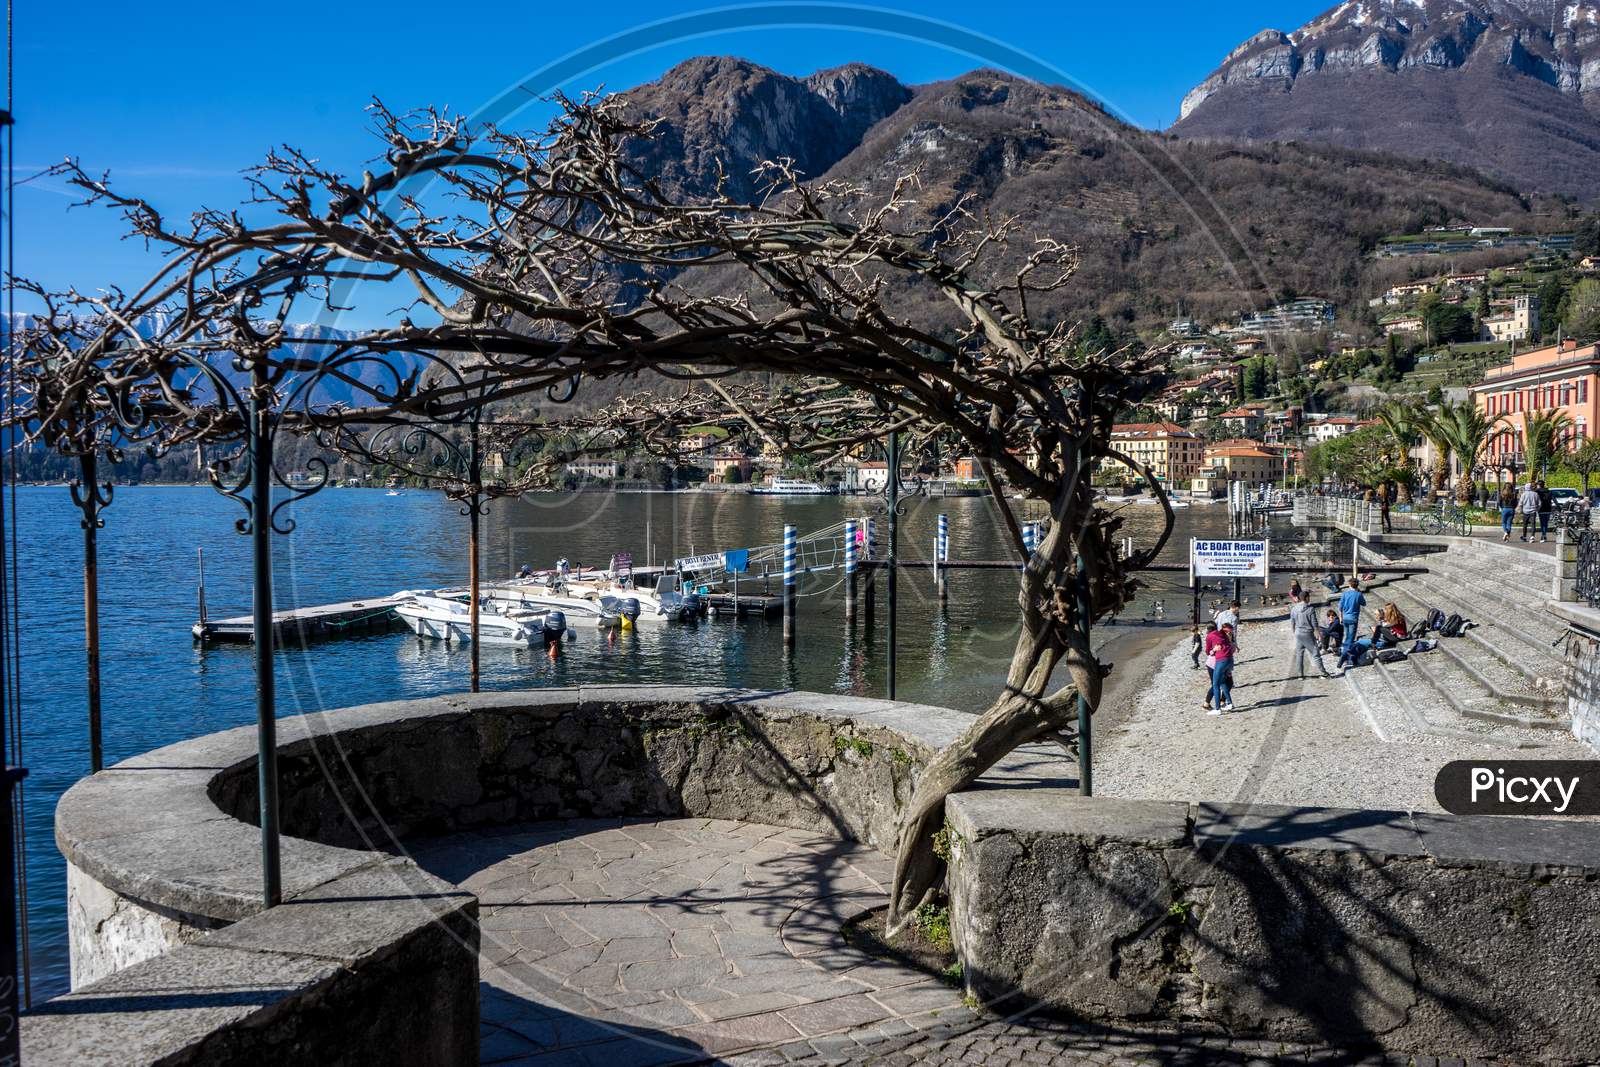 Menaggio, Italy-April 2, 2018: People Relaxing At The Waterside Quay, Menaggio, Lombardy